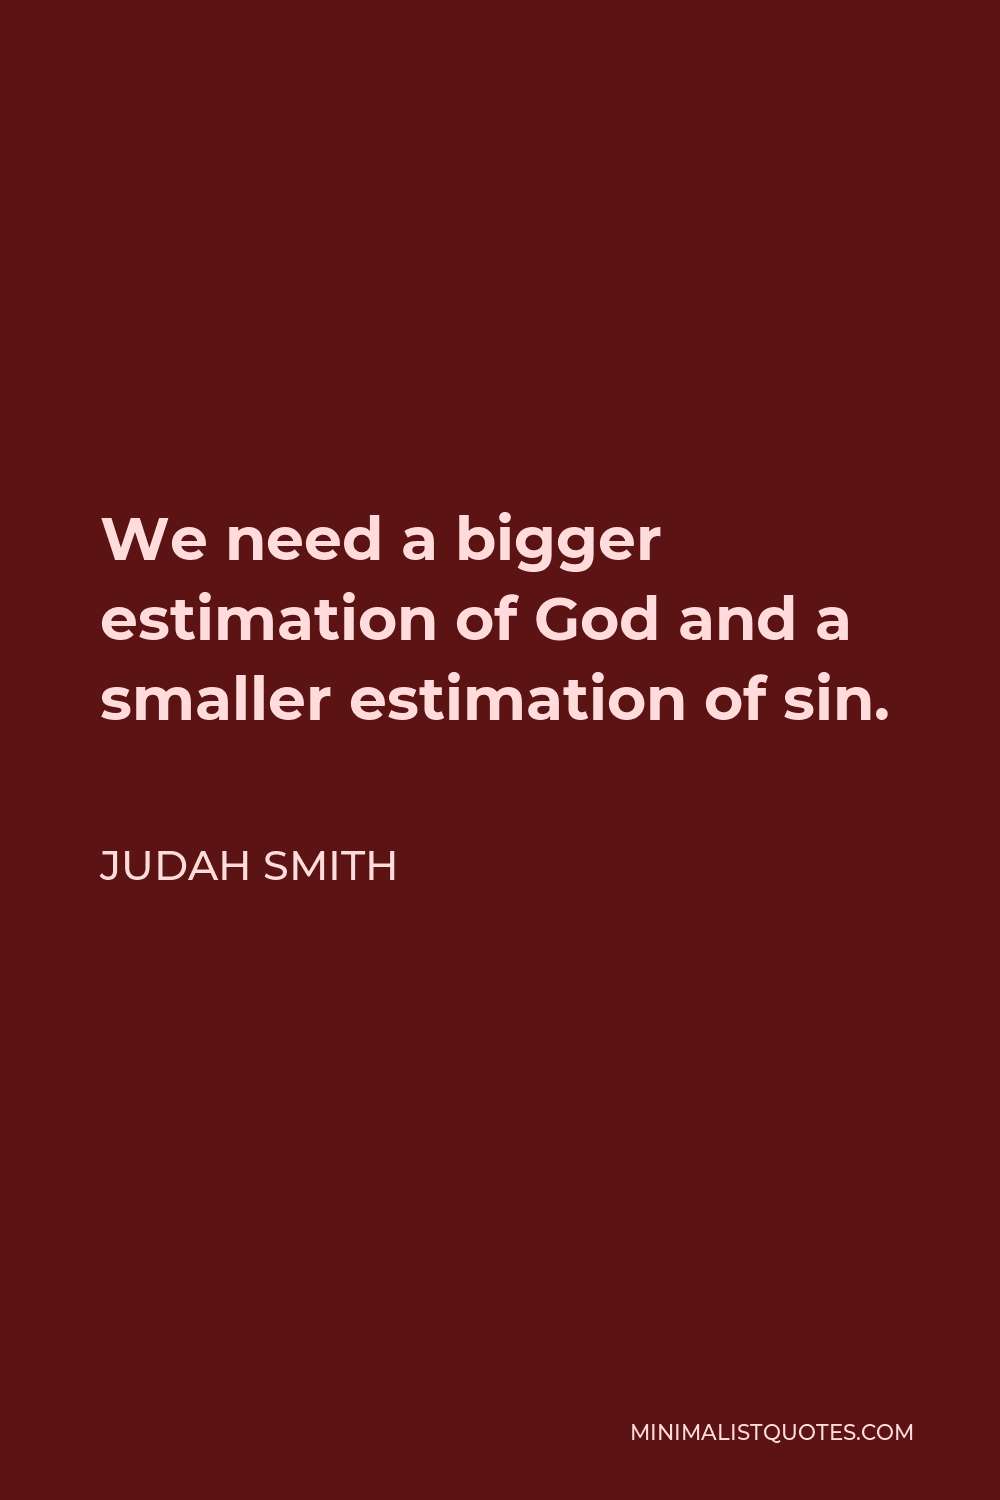 Judah Smith Quote - We need a bigger estimation of God and a smaller estimation of sin.